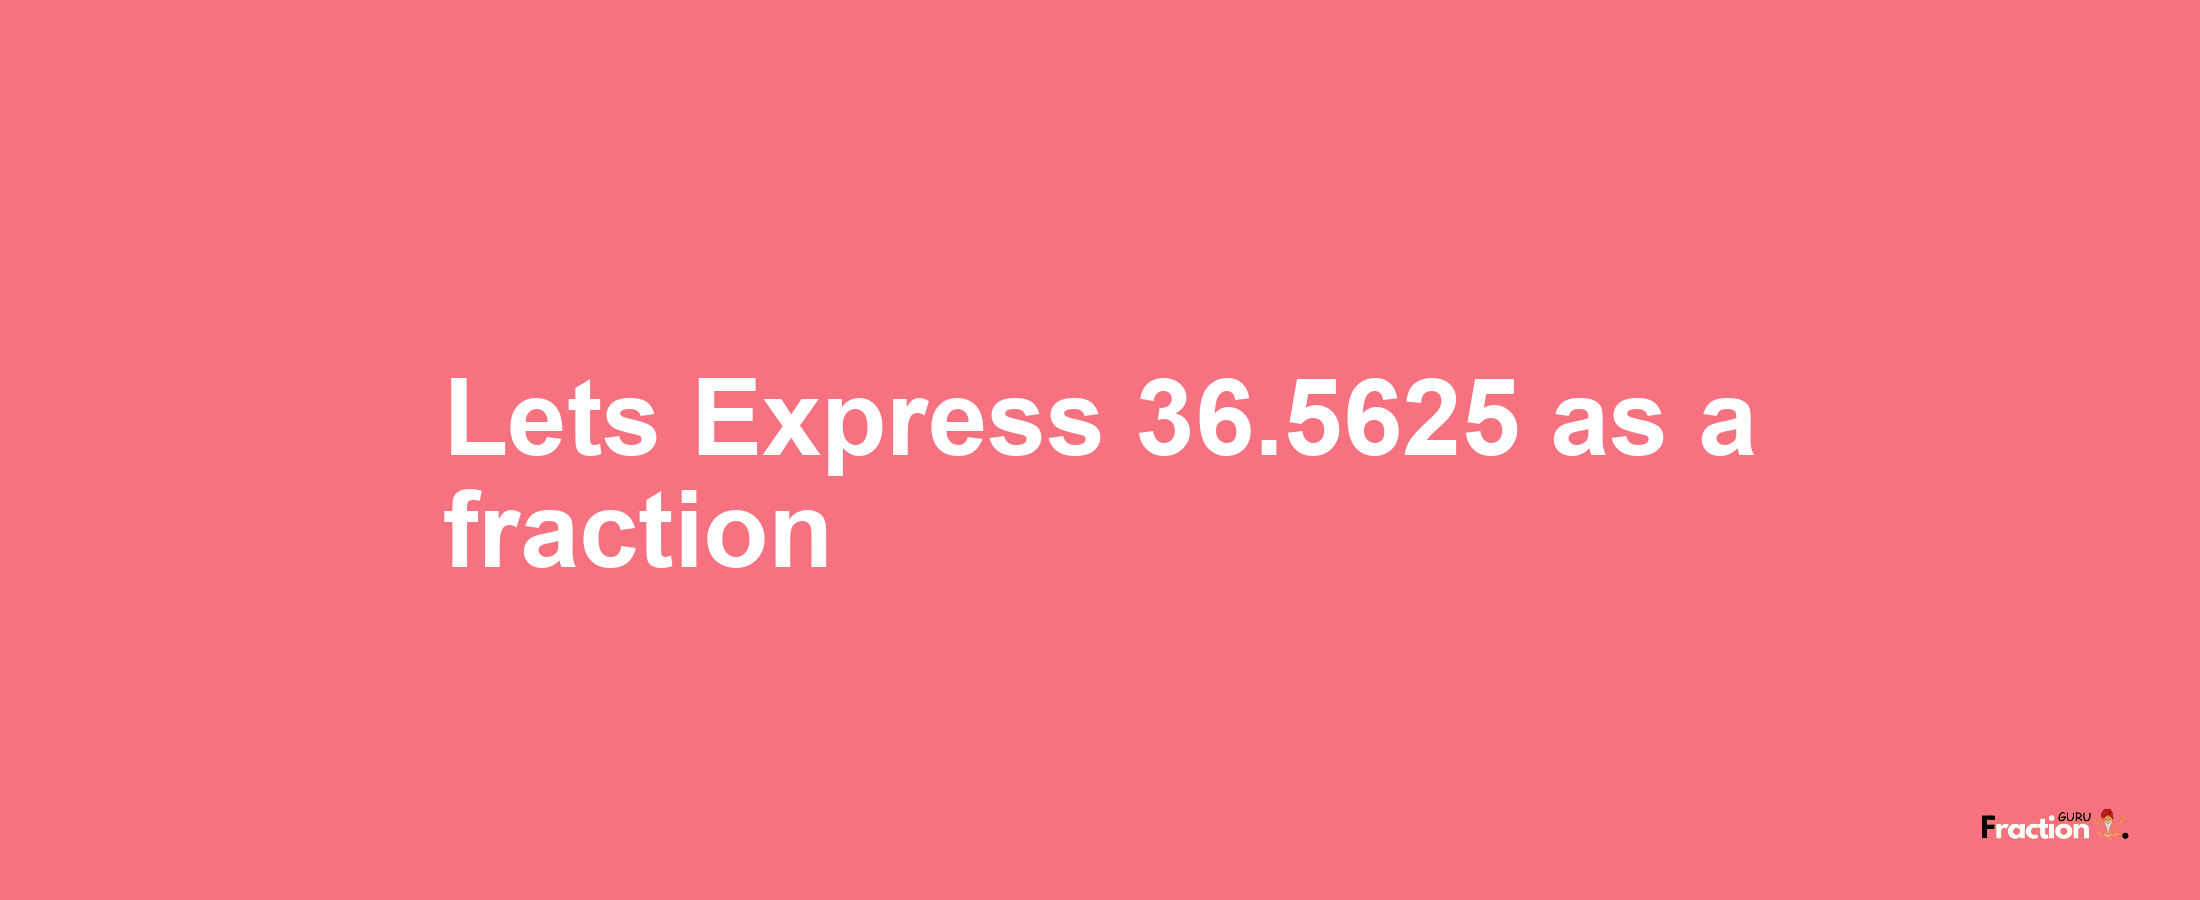 Lets Express 36.5625 as afraction